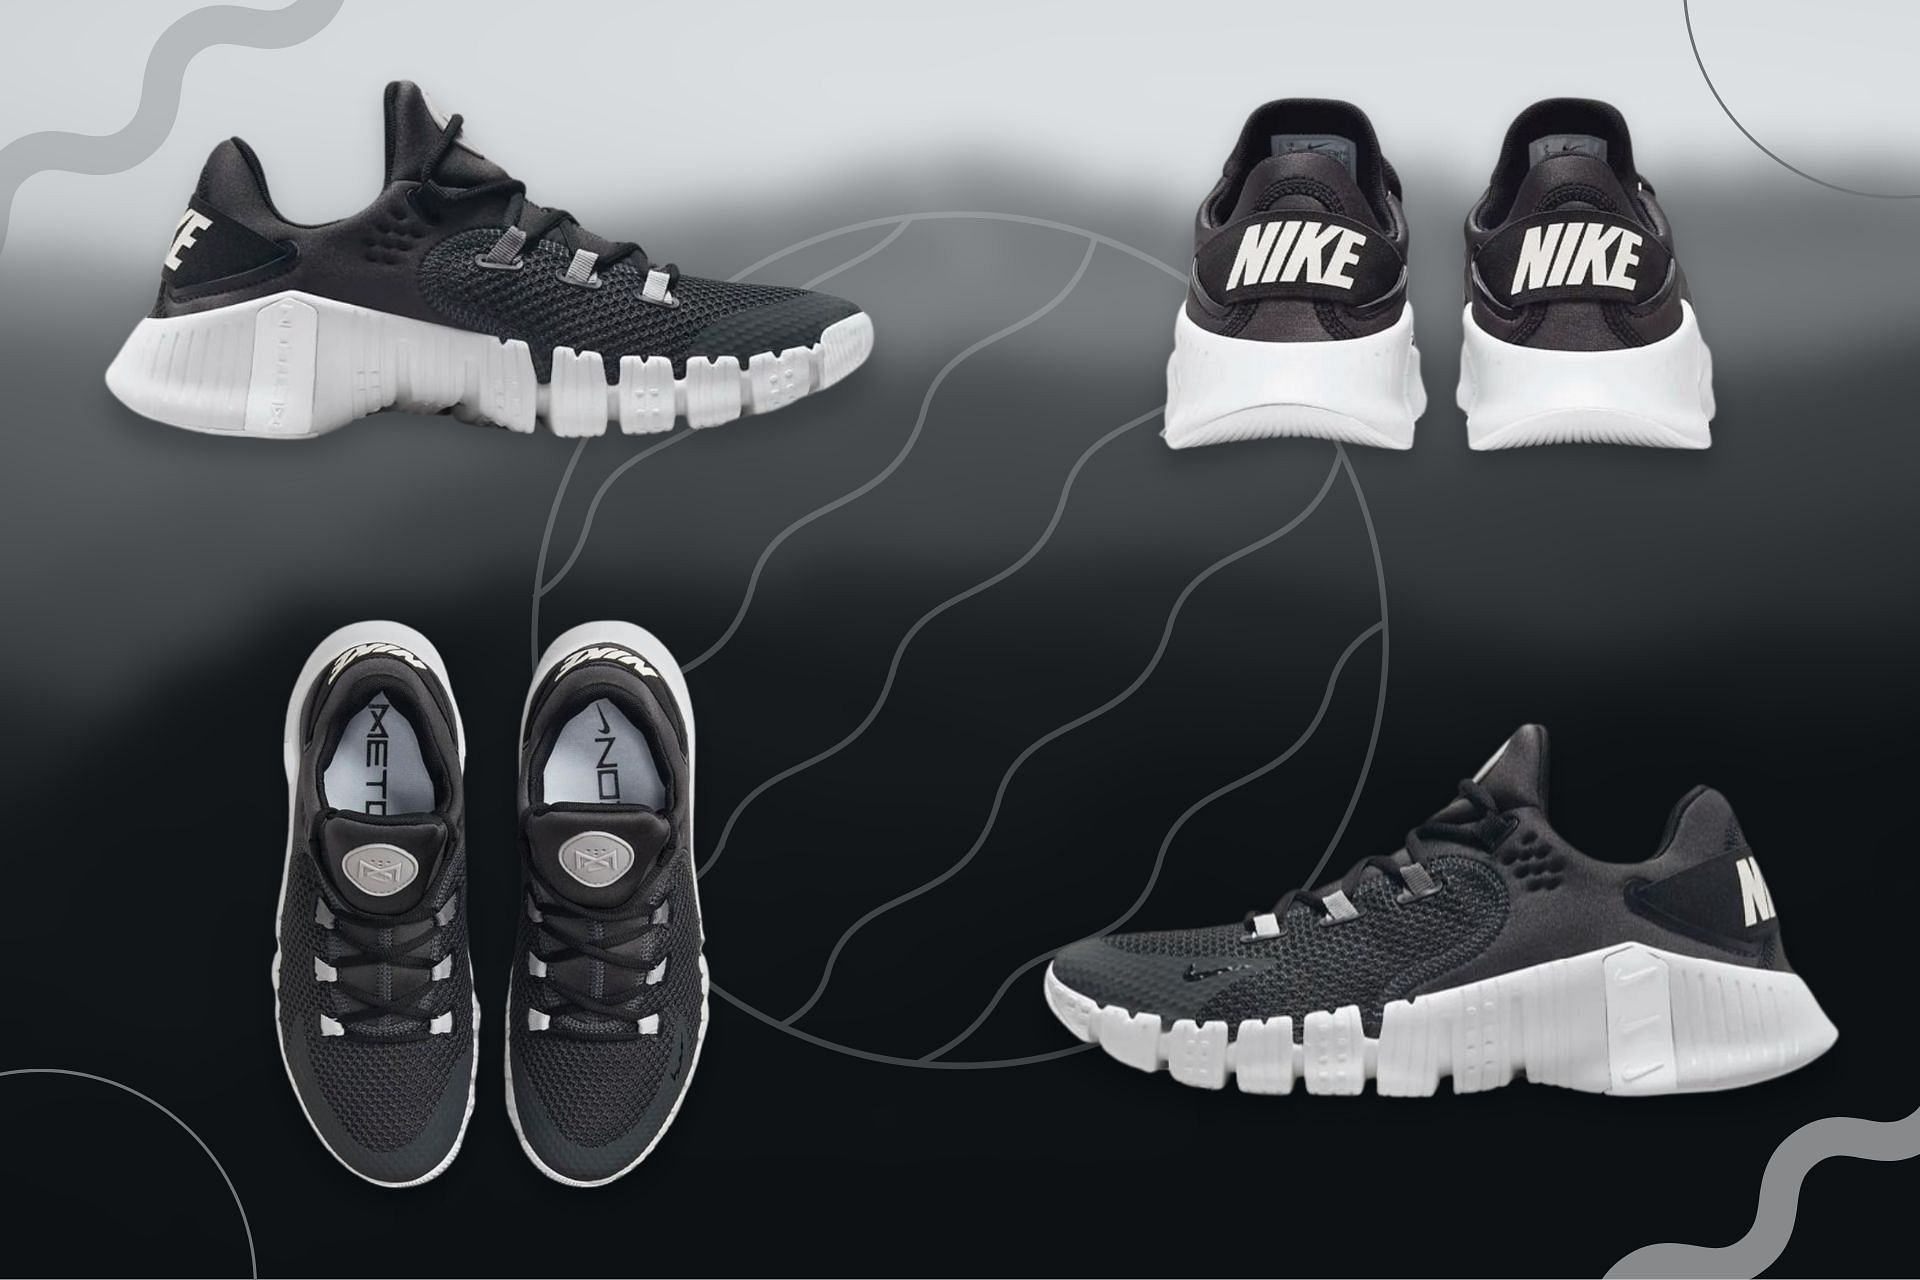 Take a closer look at these black and white lifting shoes (Image via Sportskeeda)